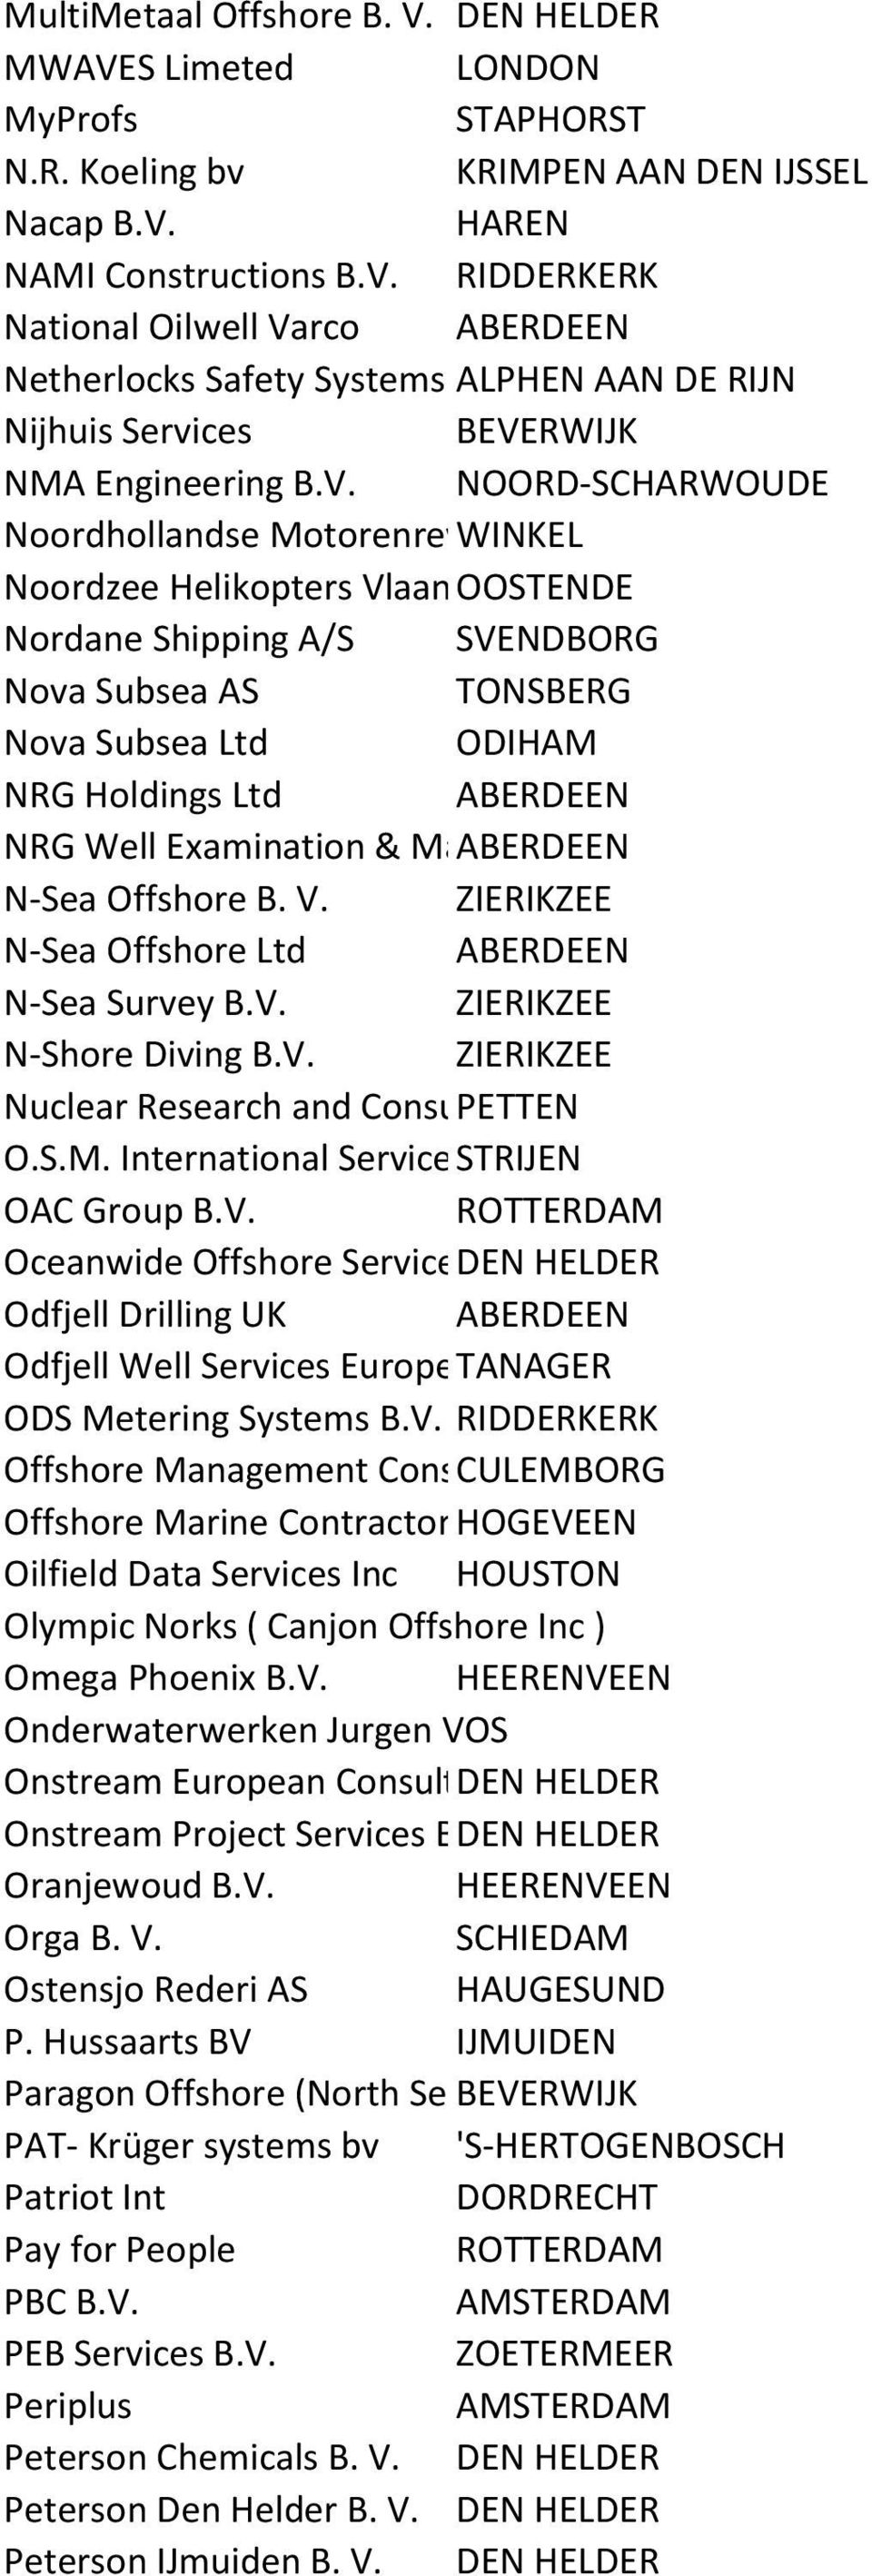 ABERDEEN NRG Well Examination & Management ABERDEEN Systems Ltd. N-Sea Offshore B. V. ZIERIKZEE N-Sea Offshore Ltd ABERDEEN N-Sea Survey B.V. ZIERIKZEE N-Shore Diving B.V. ZIERIKZEE Nuclear Research and Consultancy PETTENGroup O.